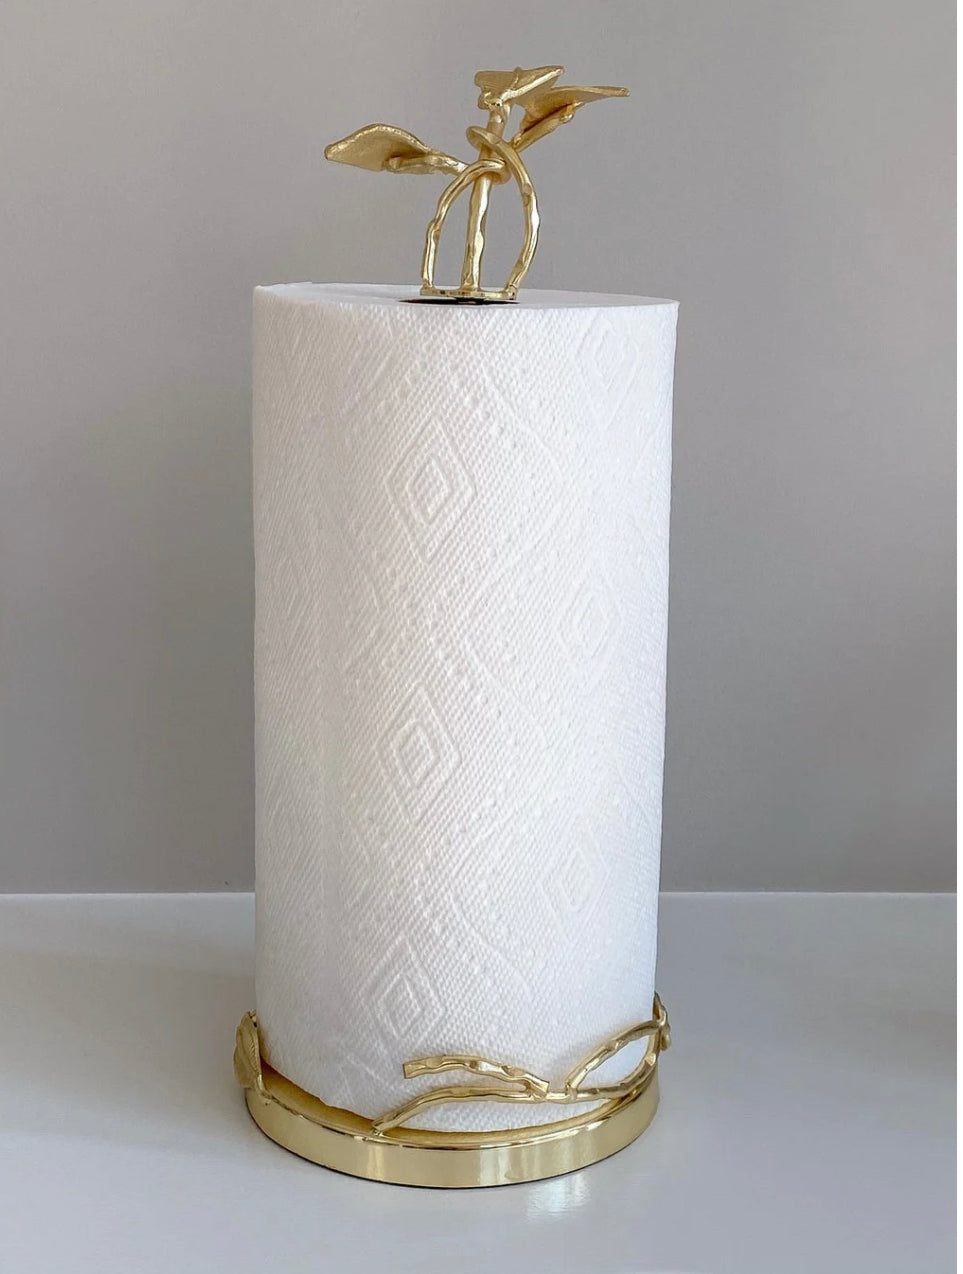 Gold Stainless Paper Towel Holder